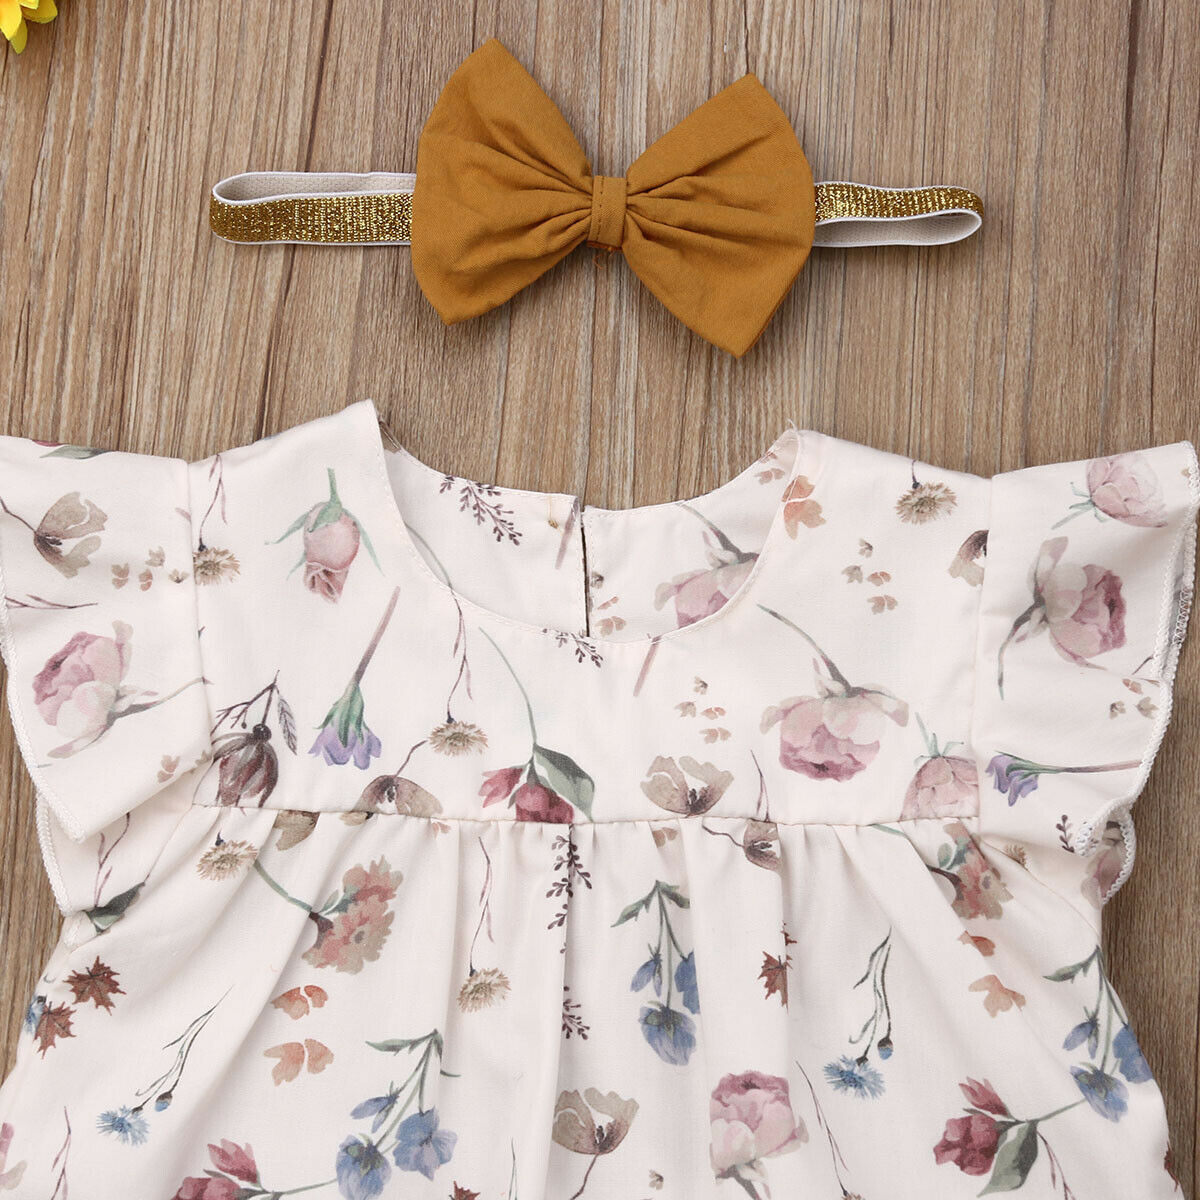 Baby's 4PCS Floral Top, Pants and Hat Outfit Set